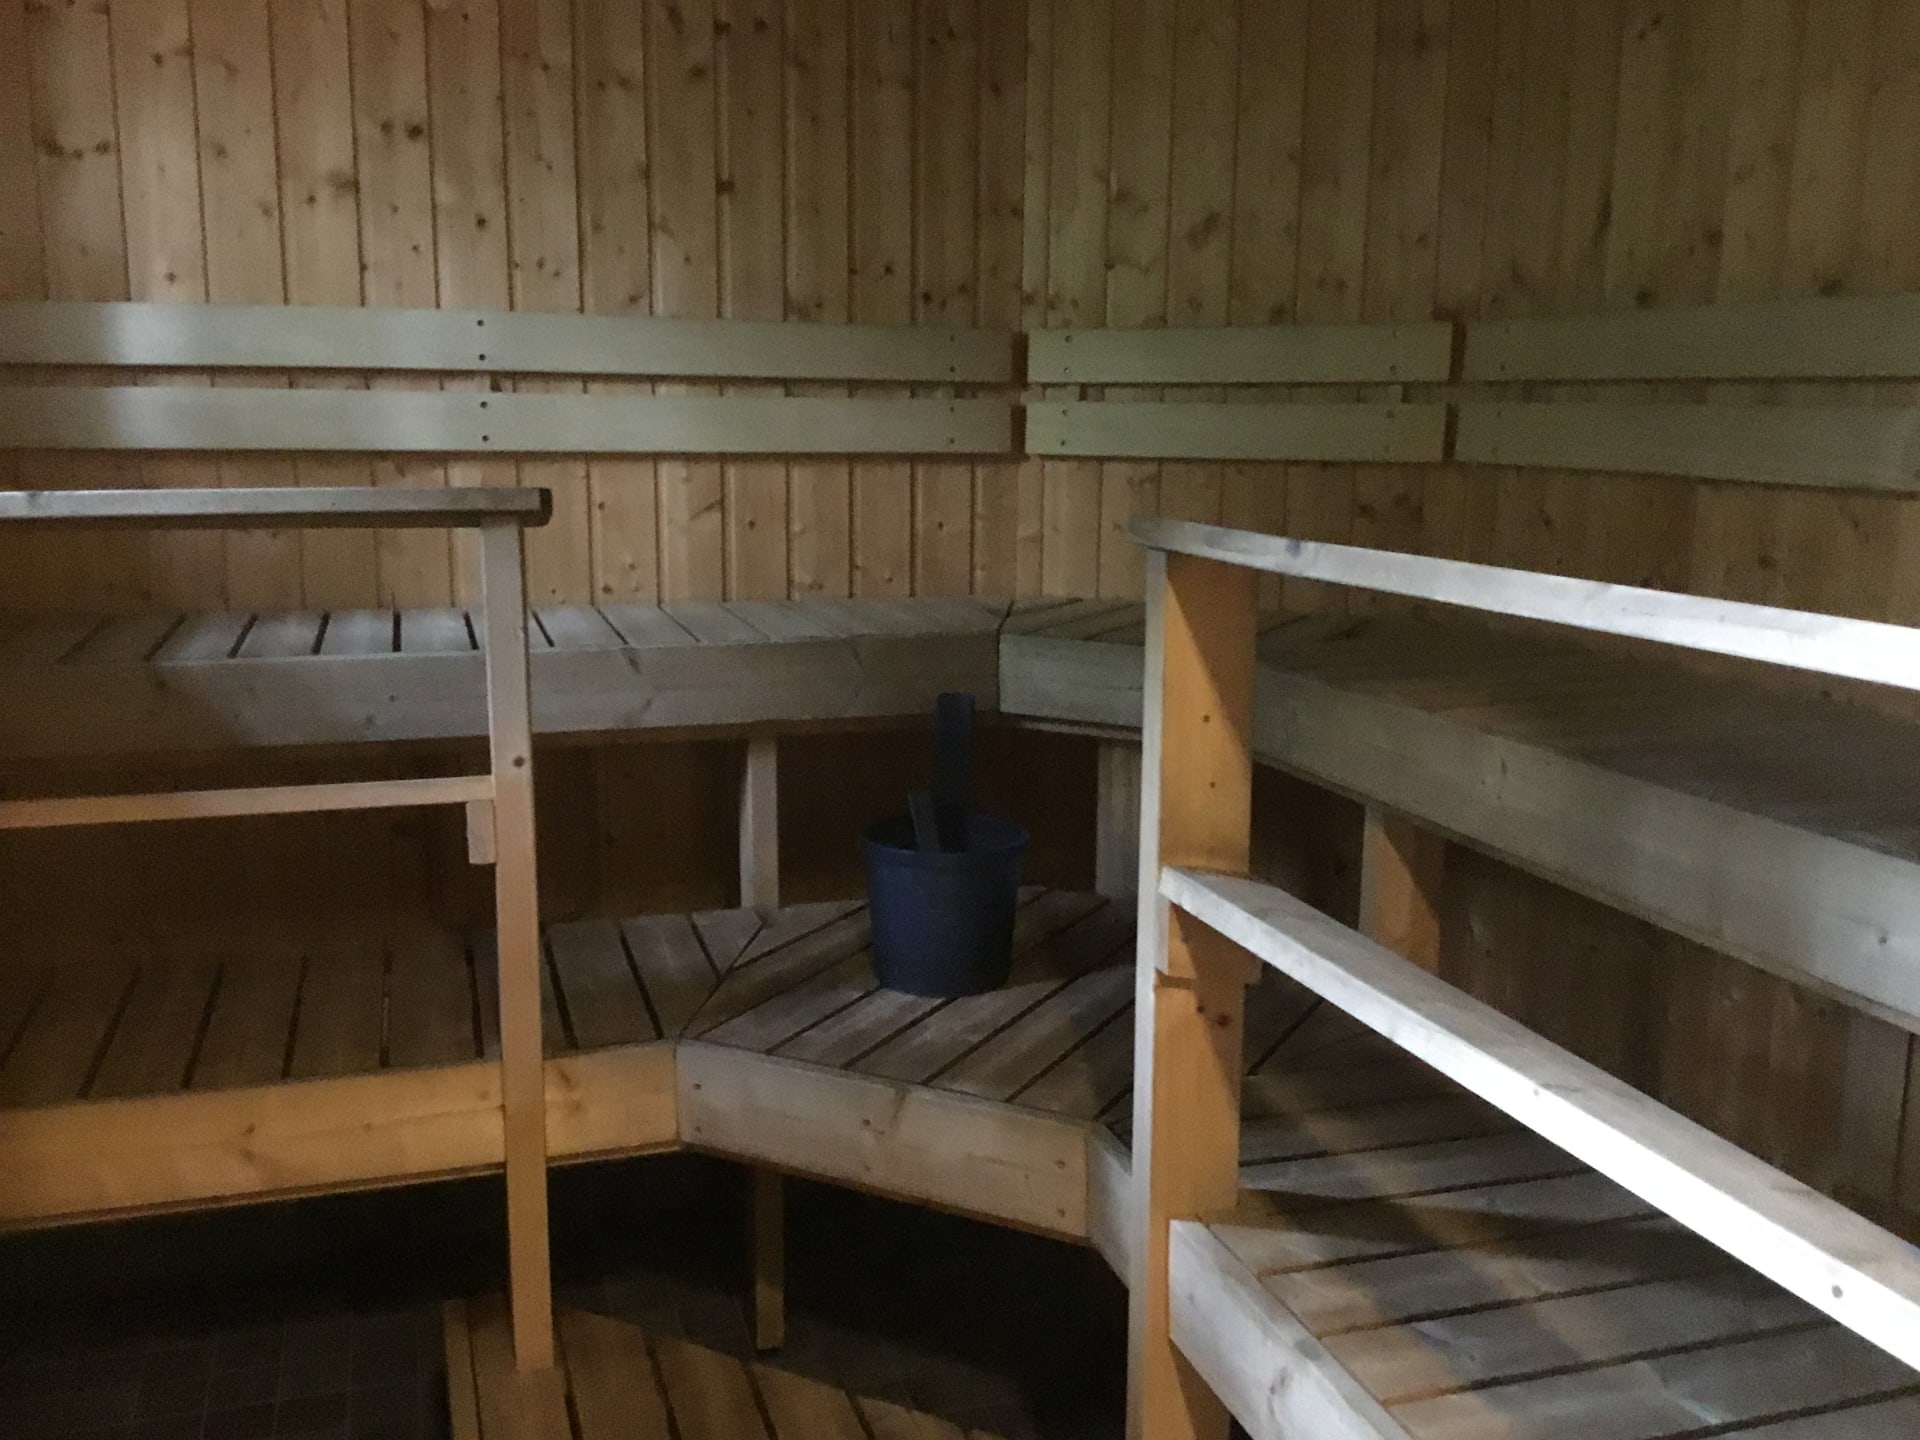 In sauna, there are sitting places for 10 guests.